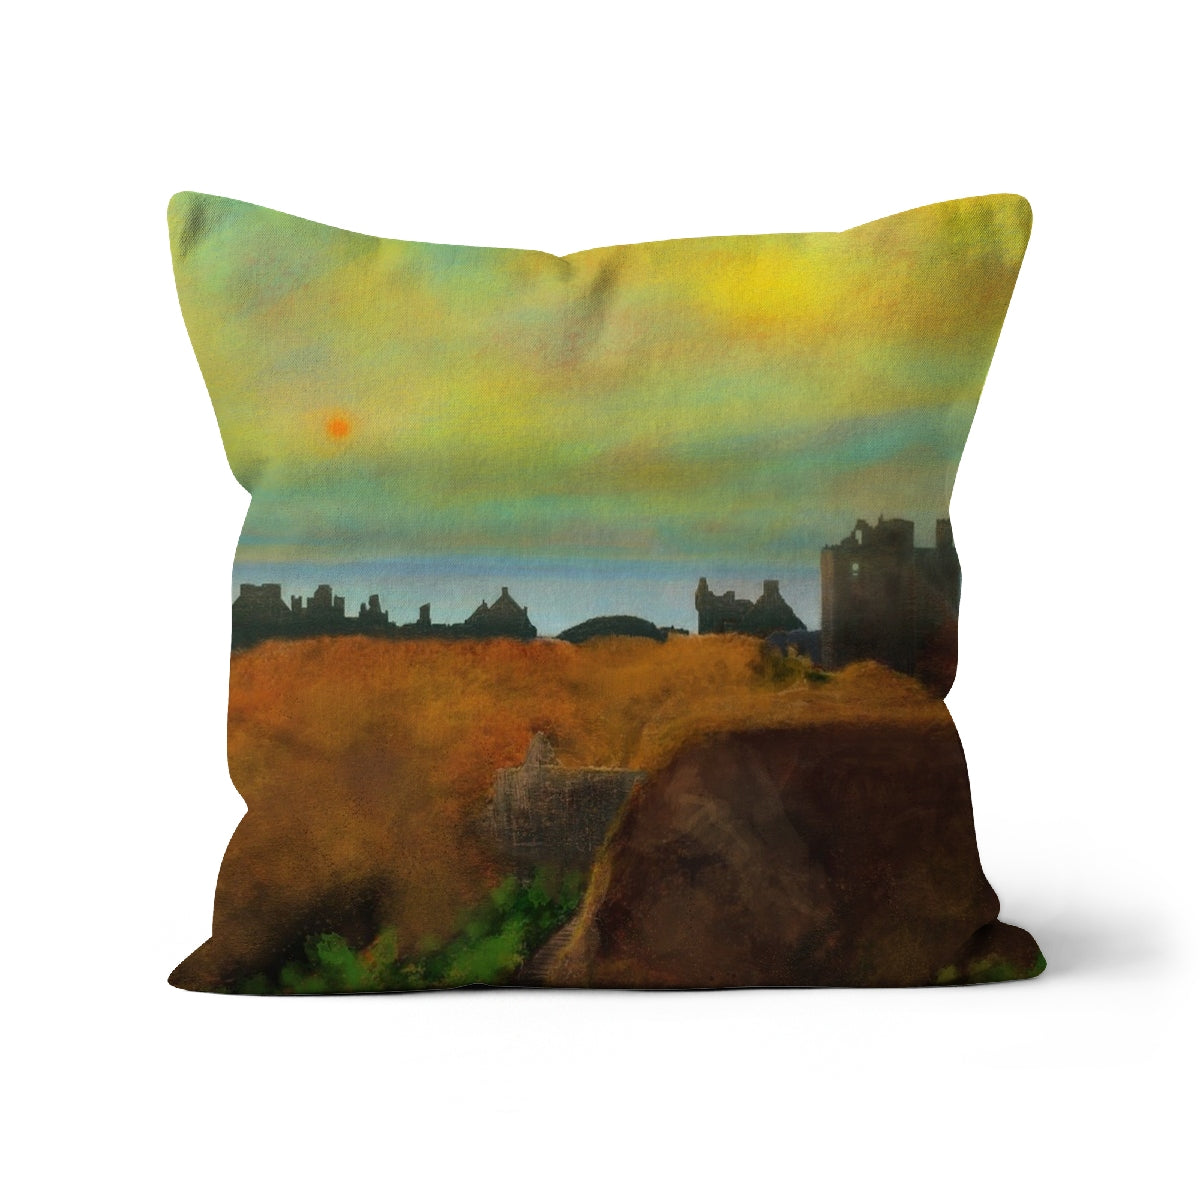 Dunnottar Castle Art Gifts Cushion-Cushions-Historic & Iconic Scotland Art Gallery-Linen-12"x12"-Paintings, Prints, Homeware, Art Gifts From Scotland By Scottish Artist Kevin Hunter